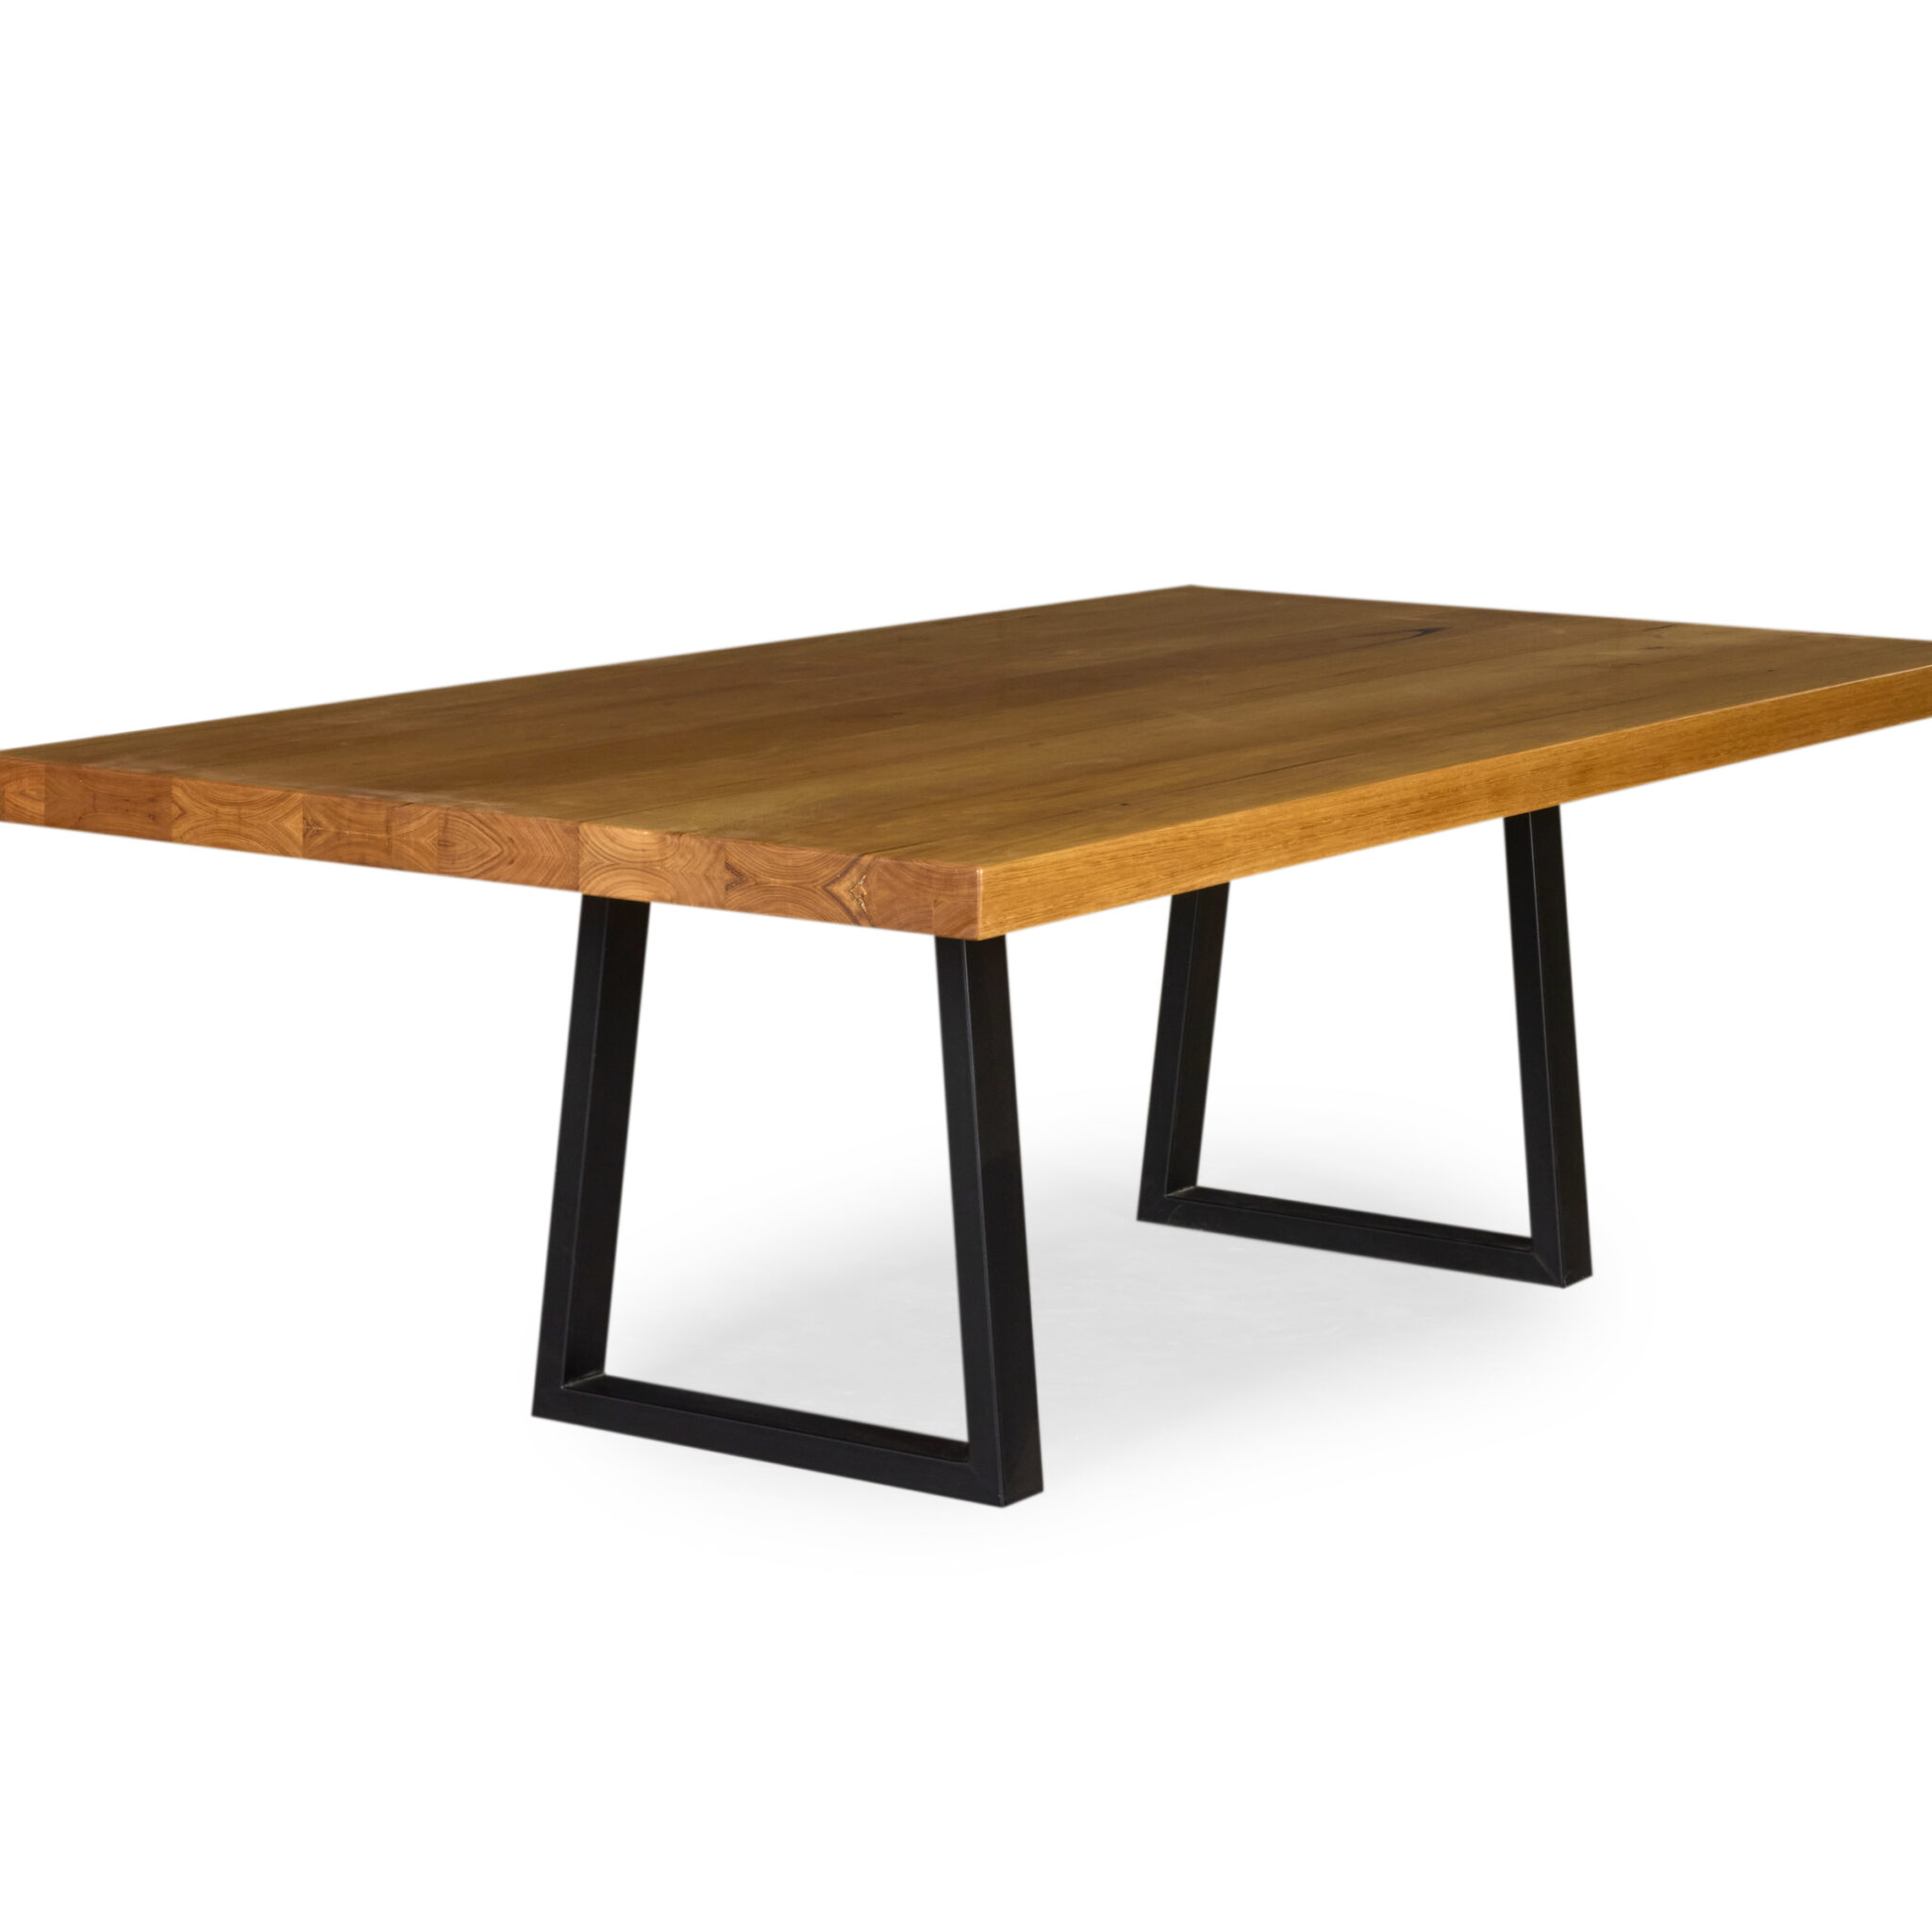 Teur Dining Table: Crafted from premium Victorian Ash timber, featuring a sleek design and sturdy build.